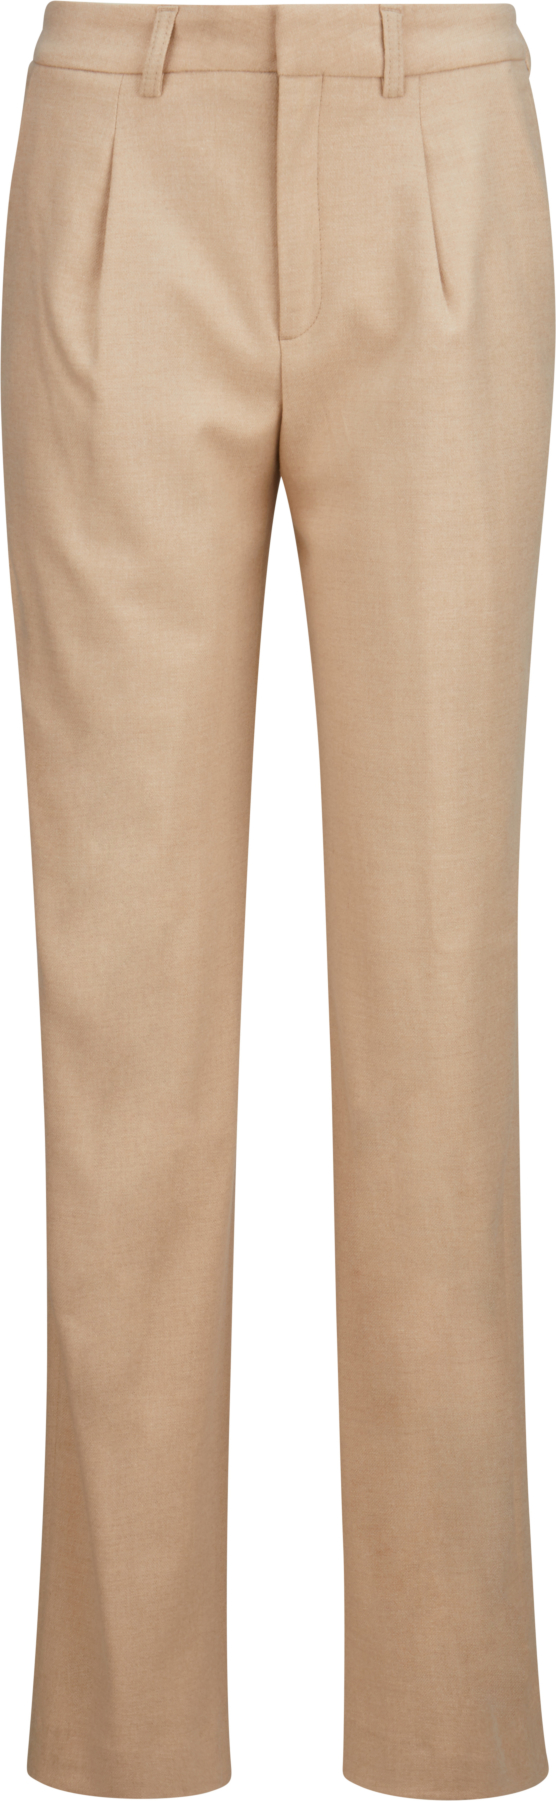 DRYKORN Hose in Creme 438699